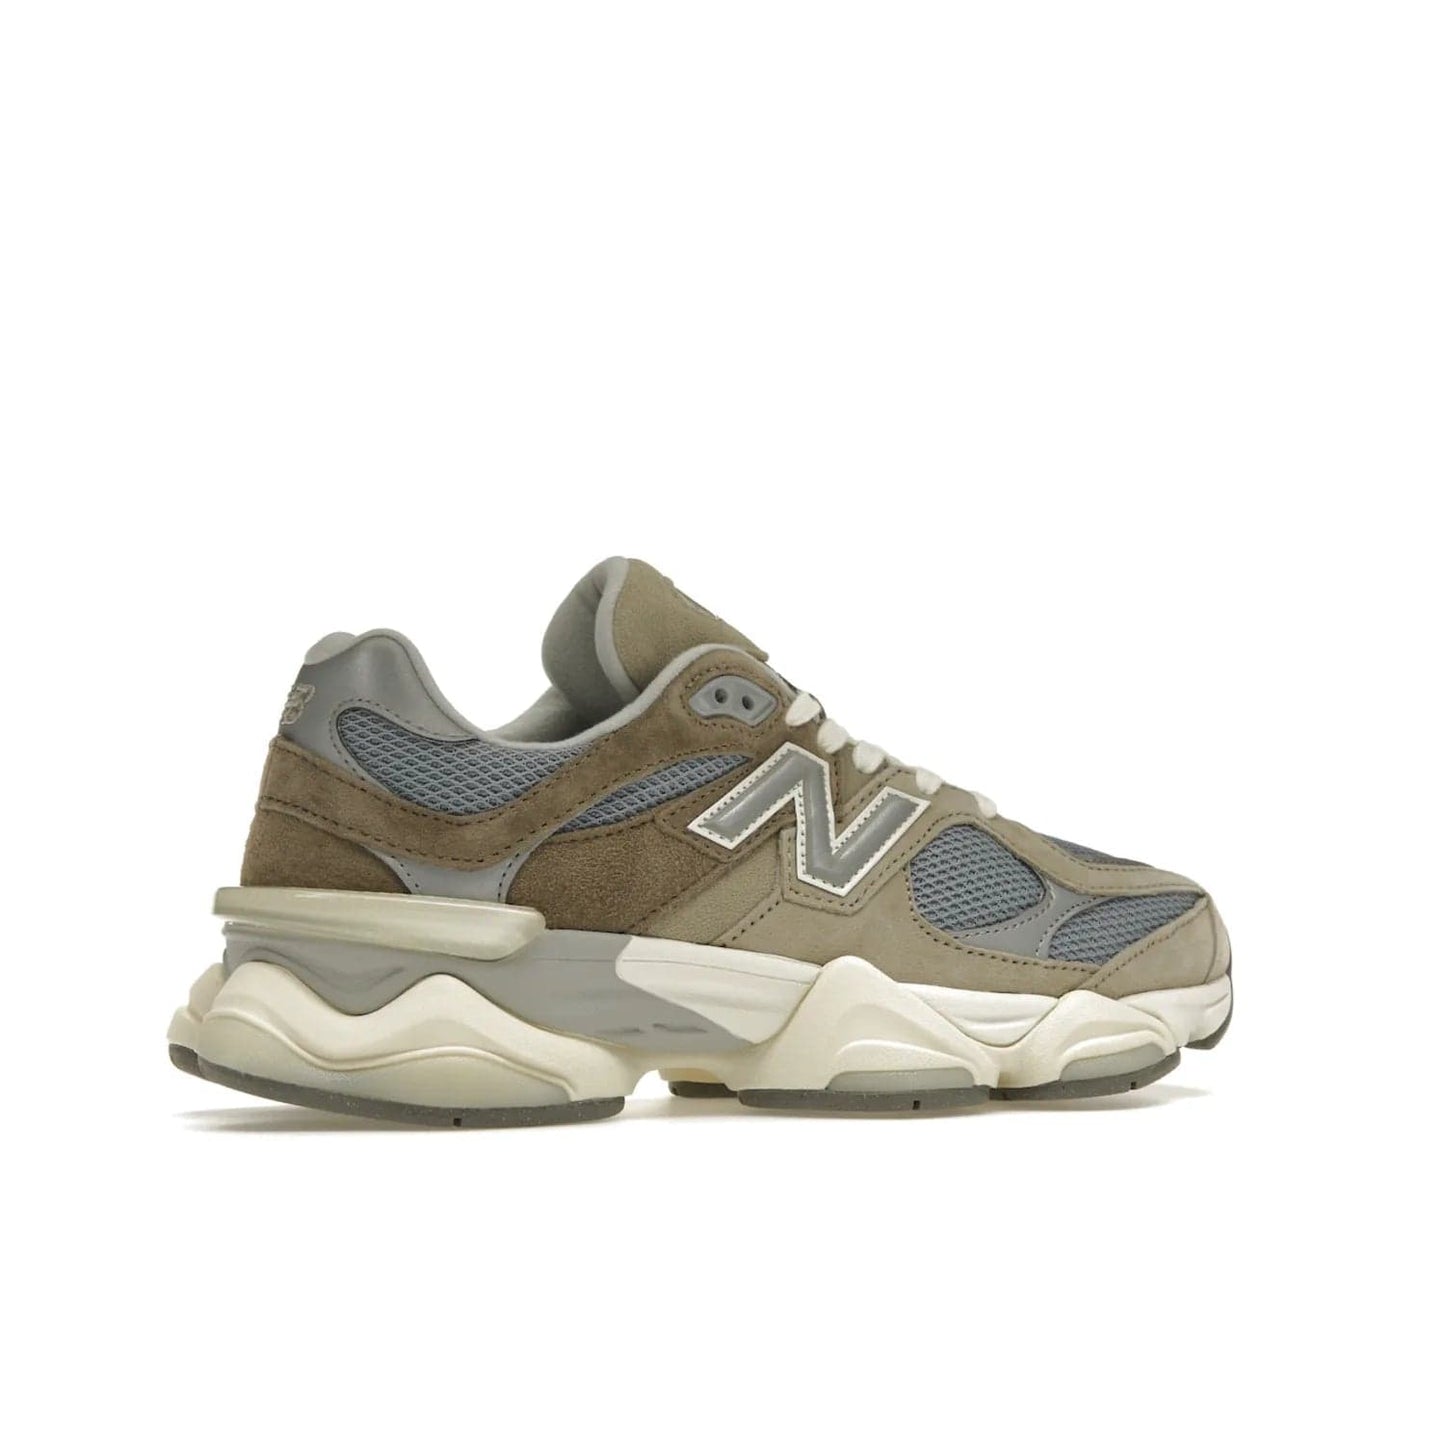 New Balance 9060 Mushroom - Image 35 - Only at www.BallersClubKickz.com - Get the New Balance 9060 Mushroom in stylish aluminum and mushroom tones. Featuring a porous mesh fabric with multiple suede overlays, a grey N symbol and rugged off-white/grey sole. Shop now and make a statement.